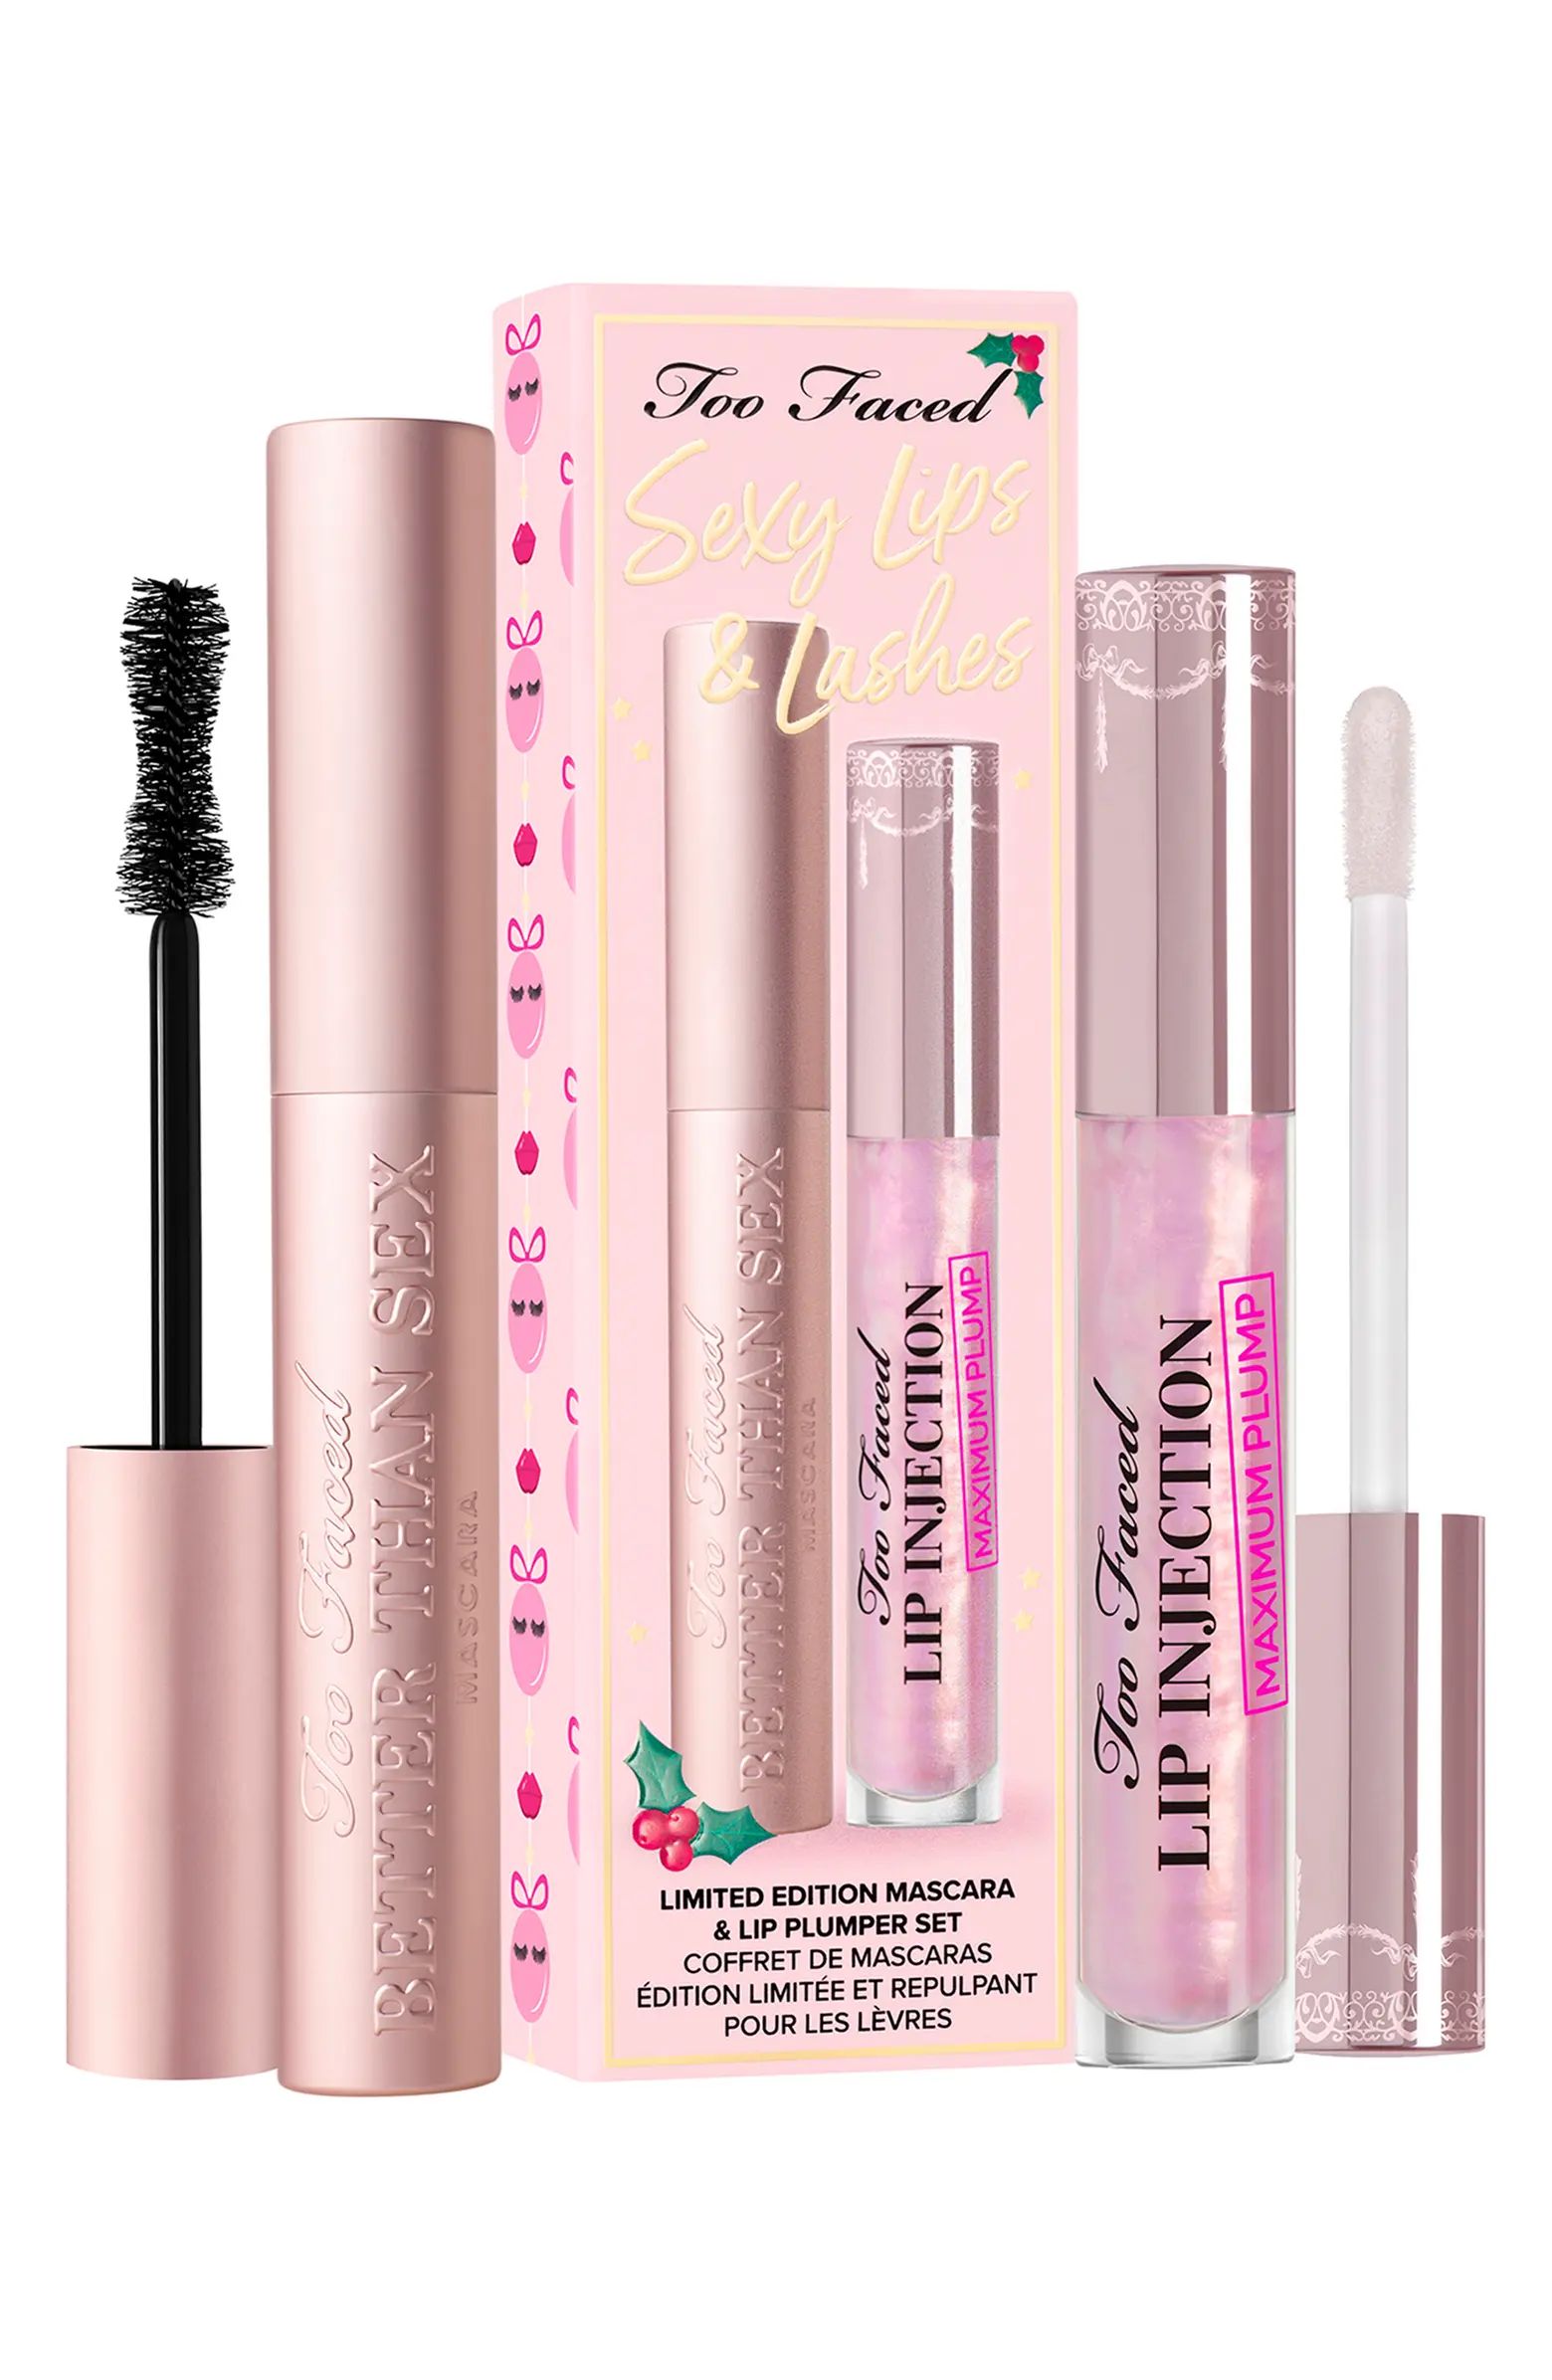 Sexy Lips & Lashes Set $62 Value | Nordstrom